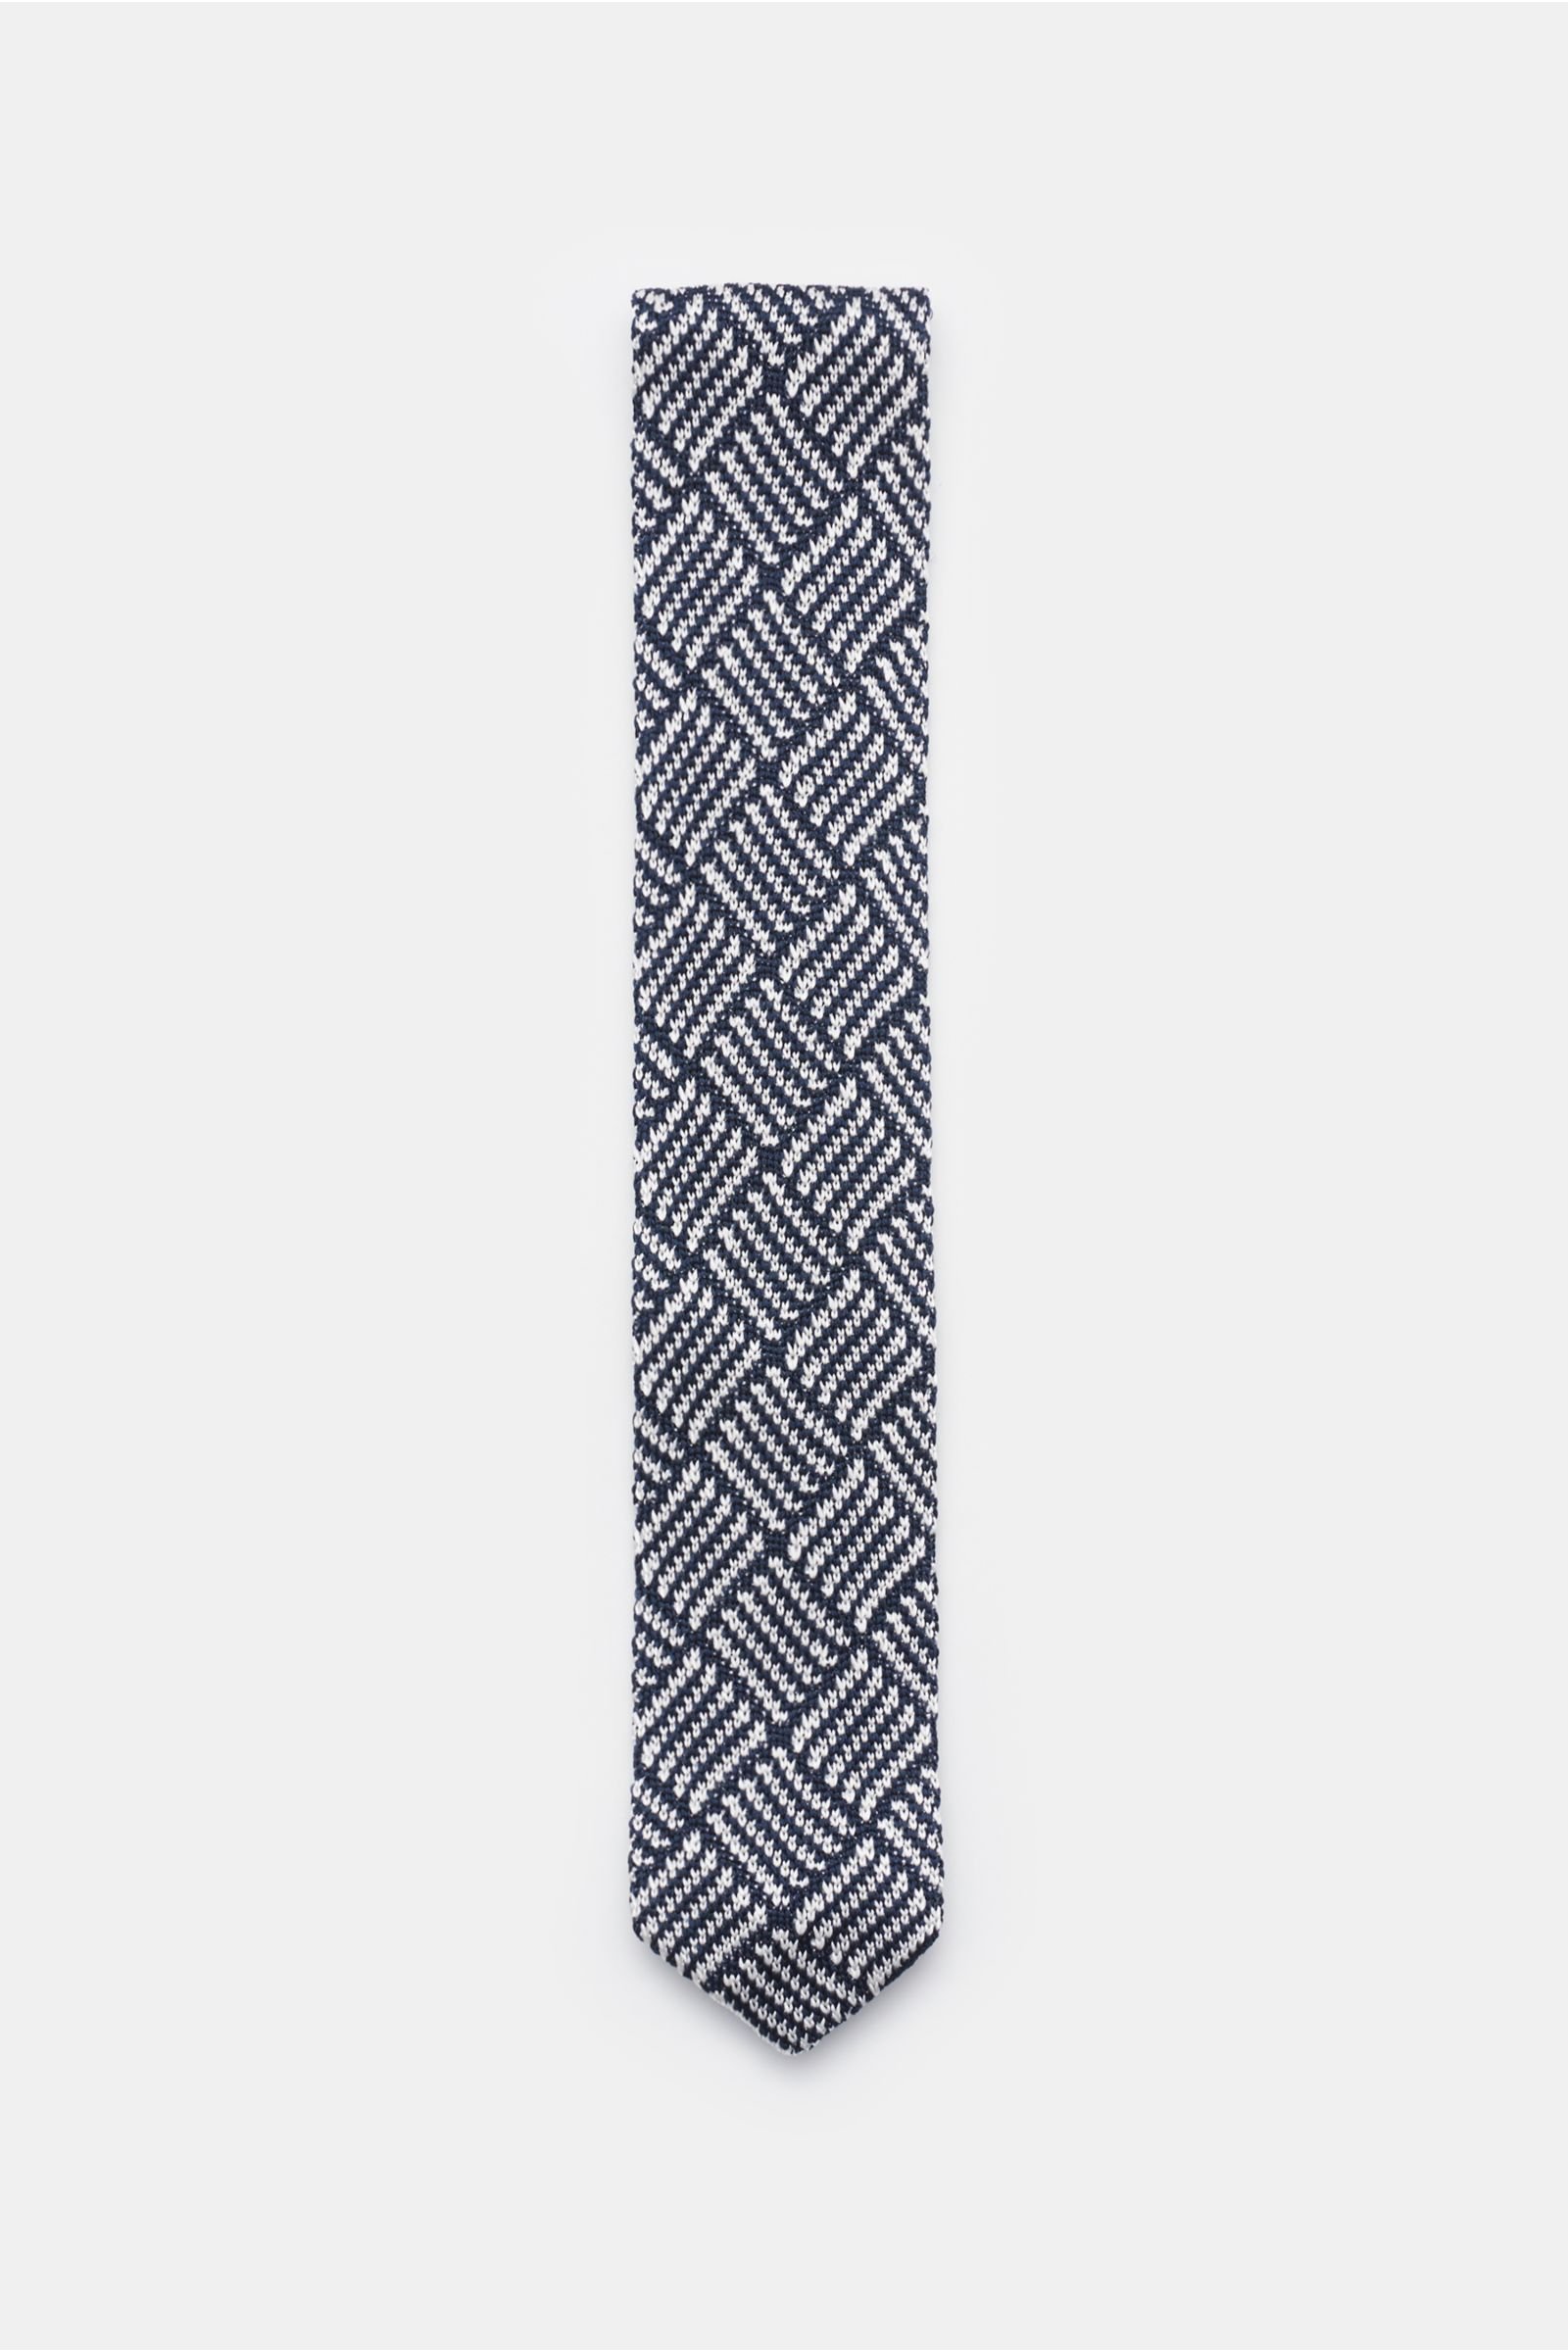 Silk knitted tie in navy/white patterned